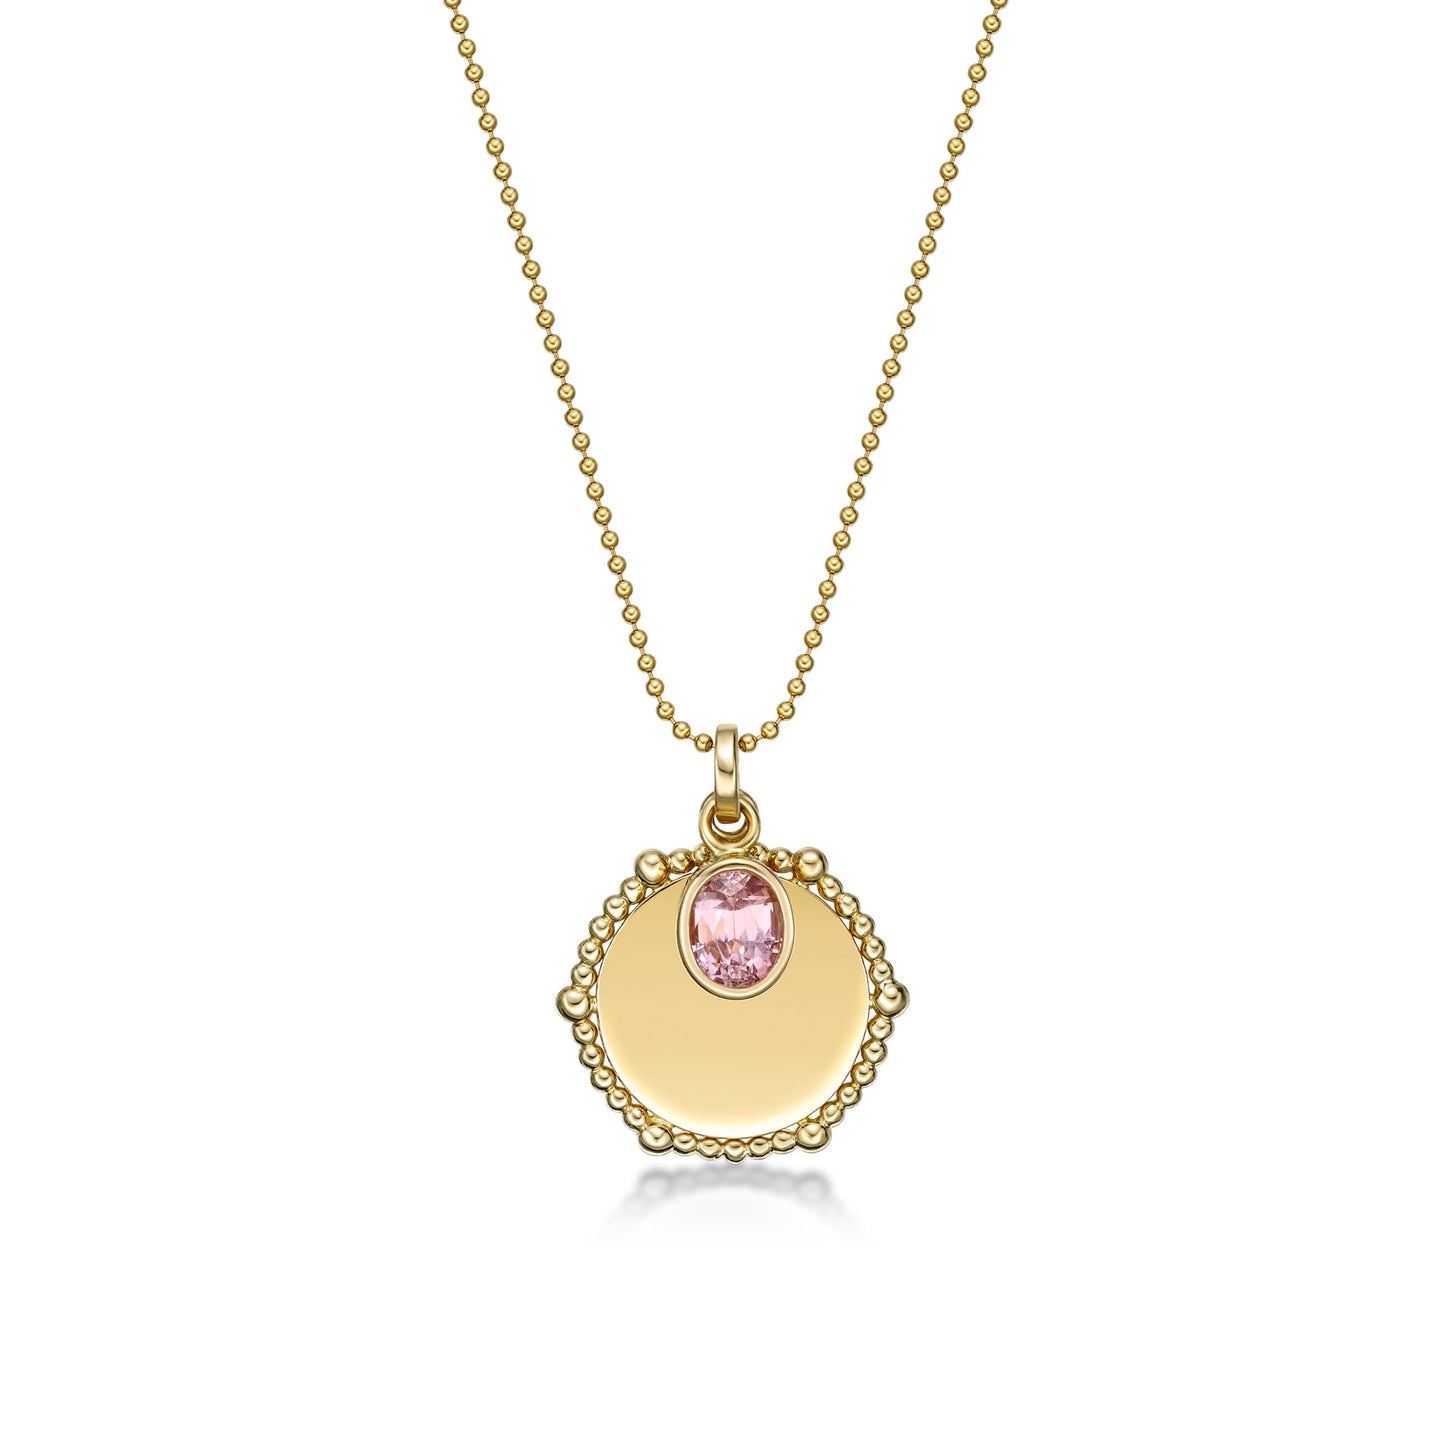 18K Yellow Gold Disc Pendant with custom engraving and a bezel set Oval Pink Padparadscha Sapphire